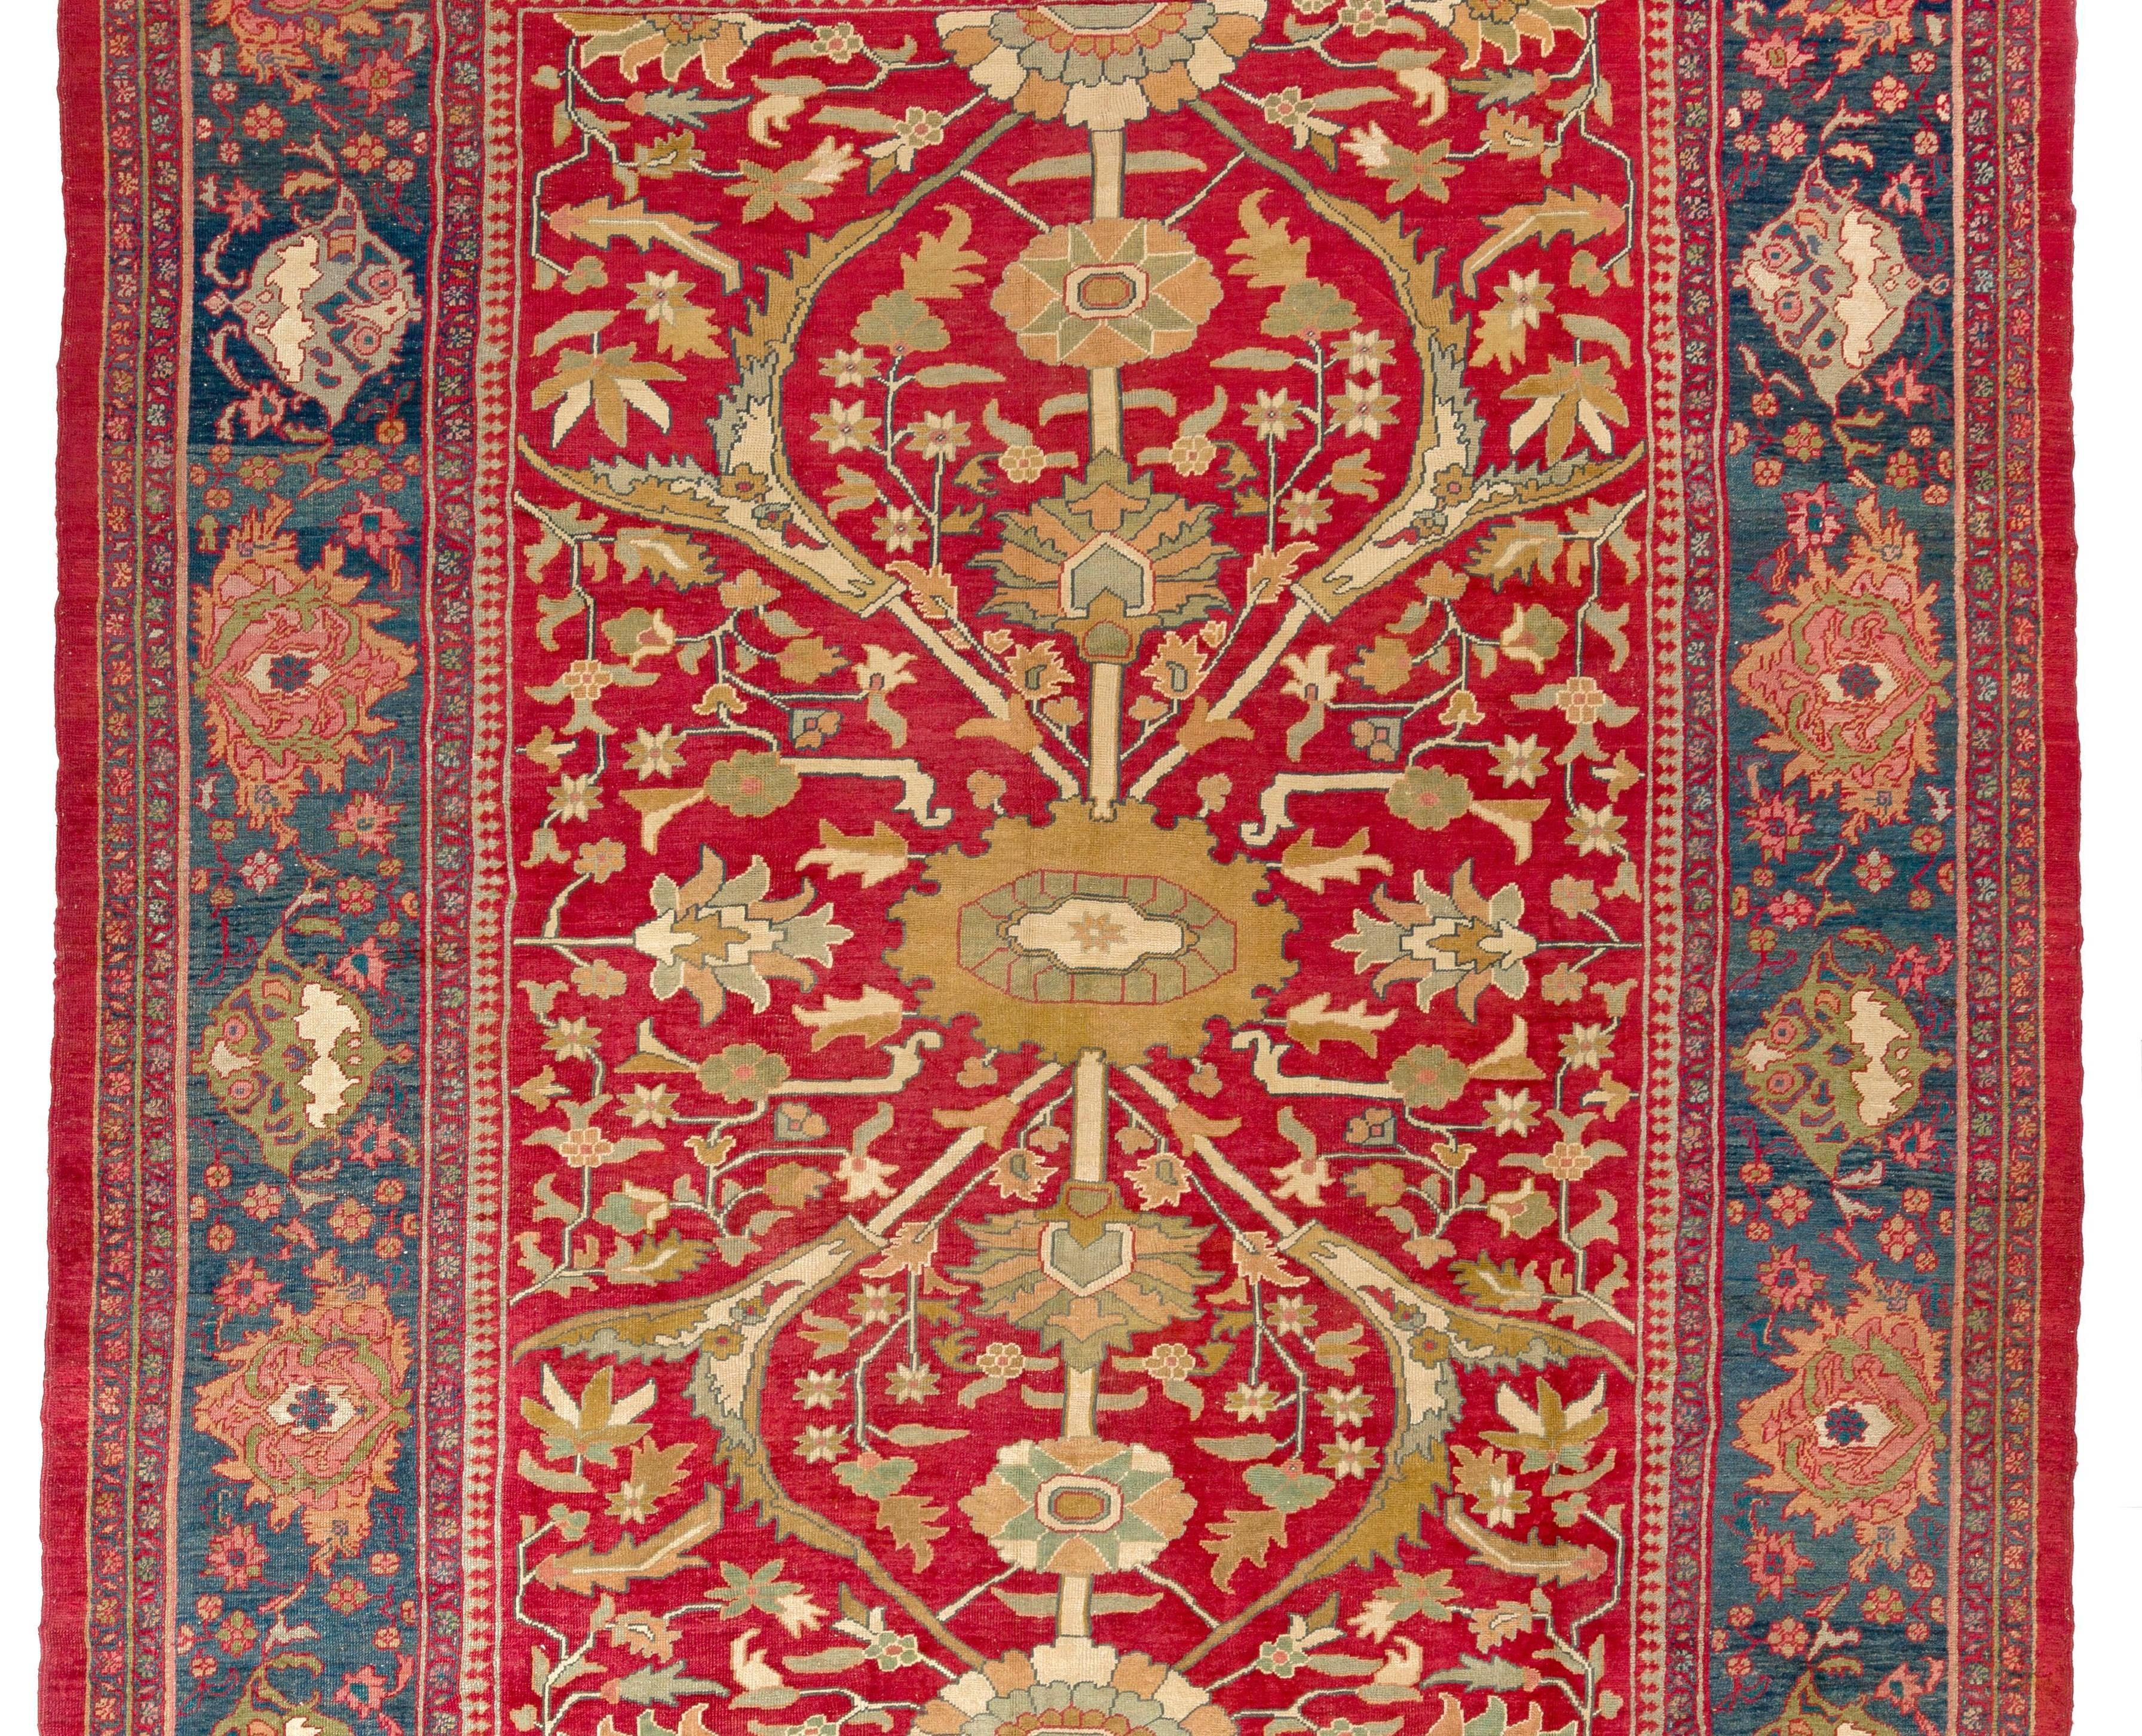 This striking Persian Ziegler Mahal Rug has a vivid red field featuring angular leaves and floral vines with a rather simple olive green blossom at the centre that also forms an axis of linked large palmettes and rosettes running halfway through the